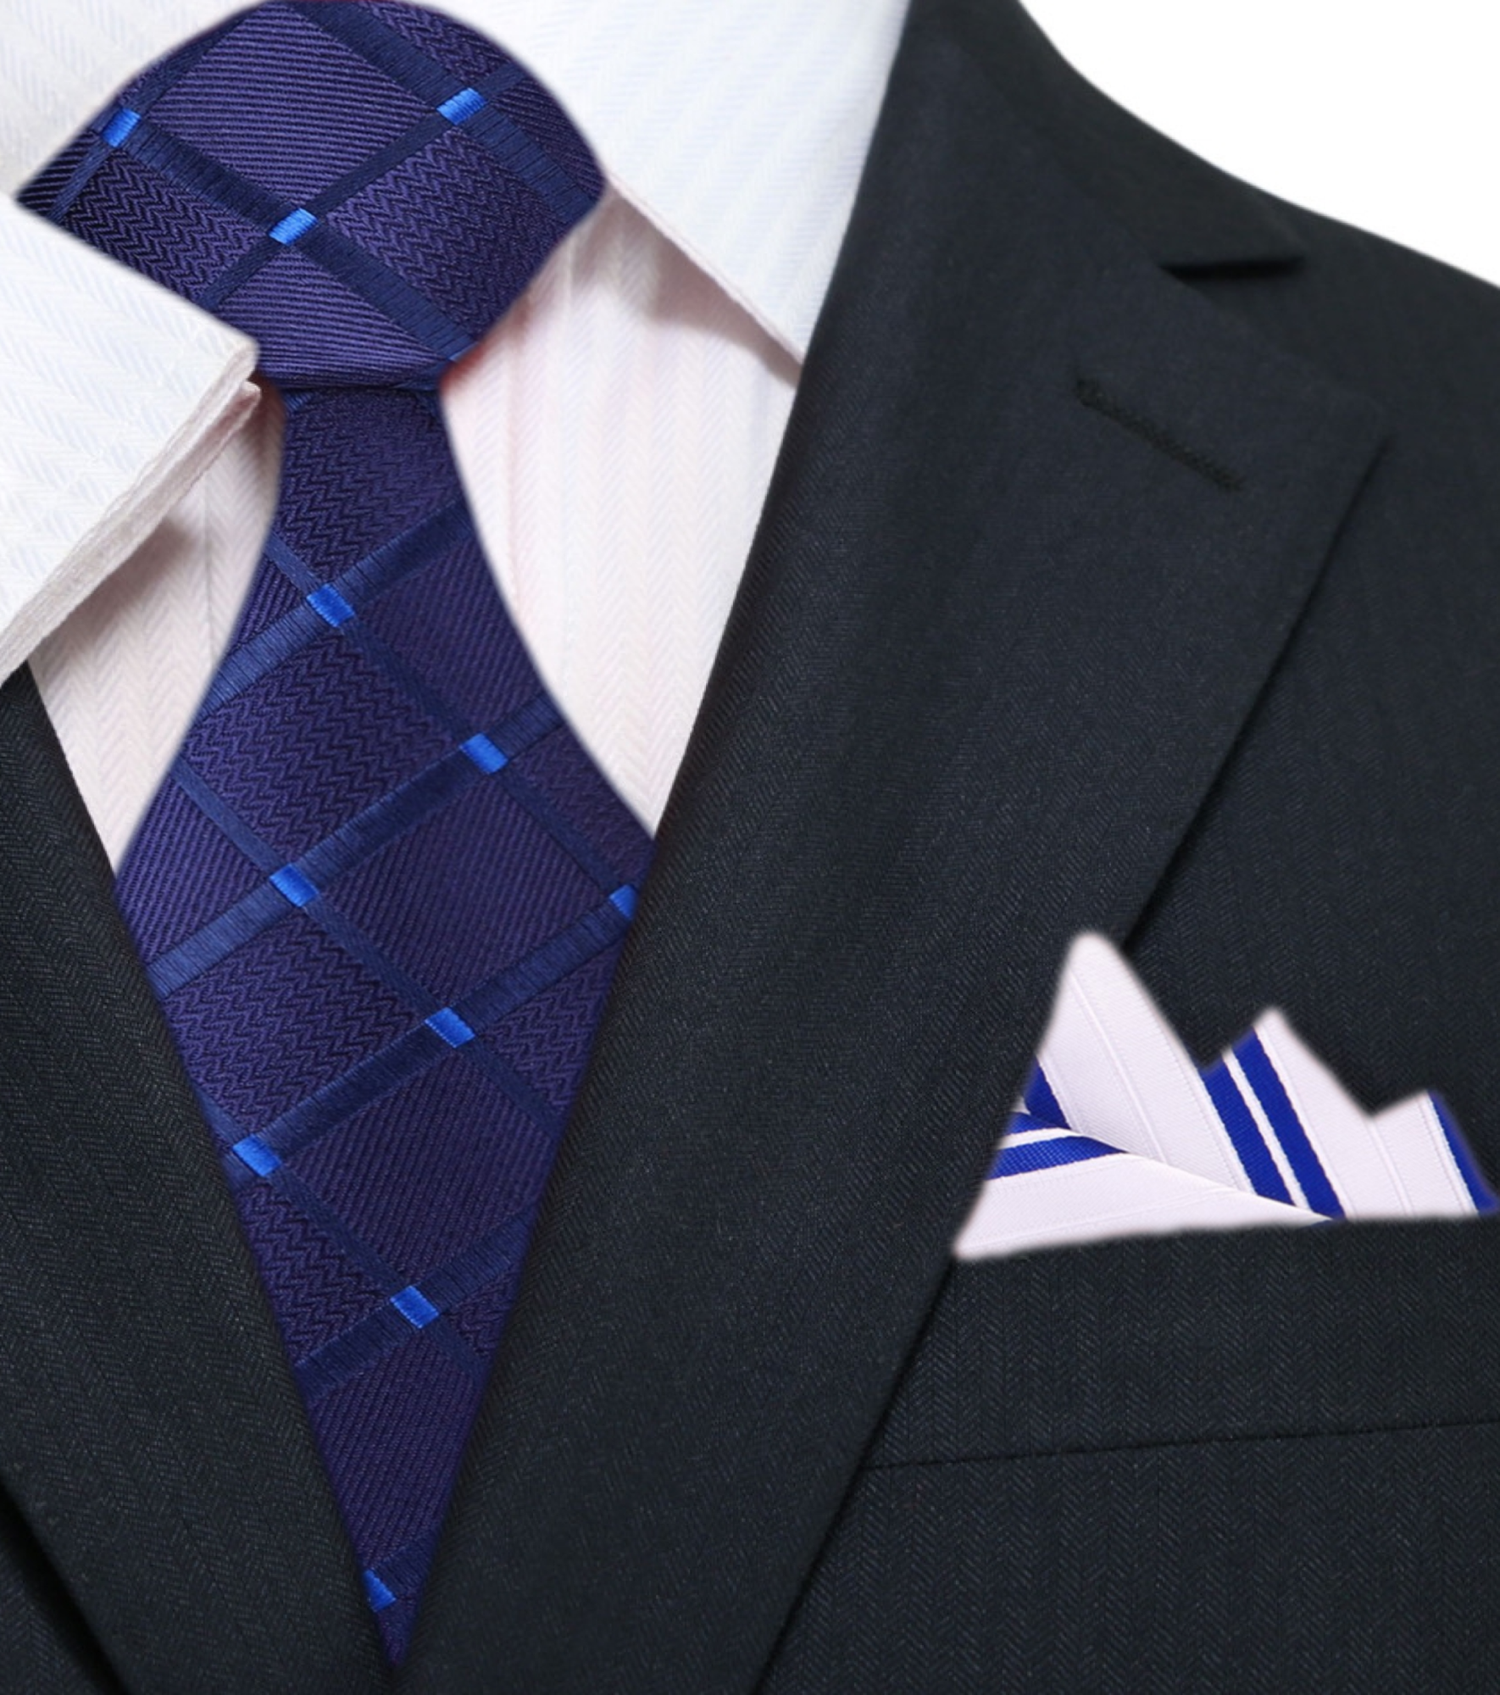 Main Blue Necktie with a Geometric Texture and White Blue Stripe Square